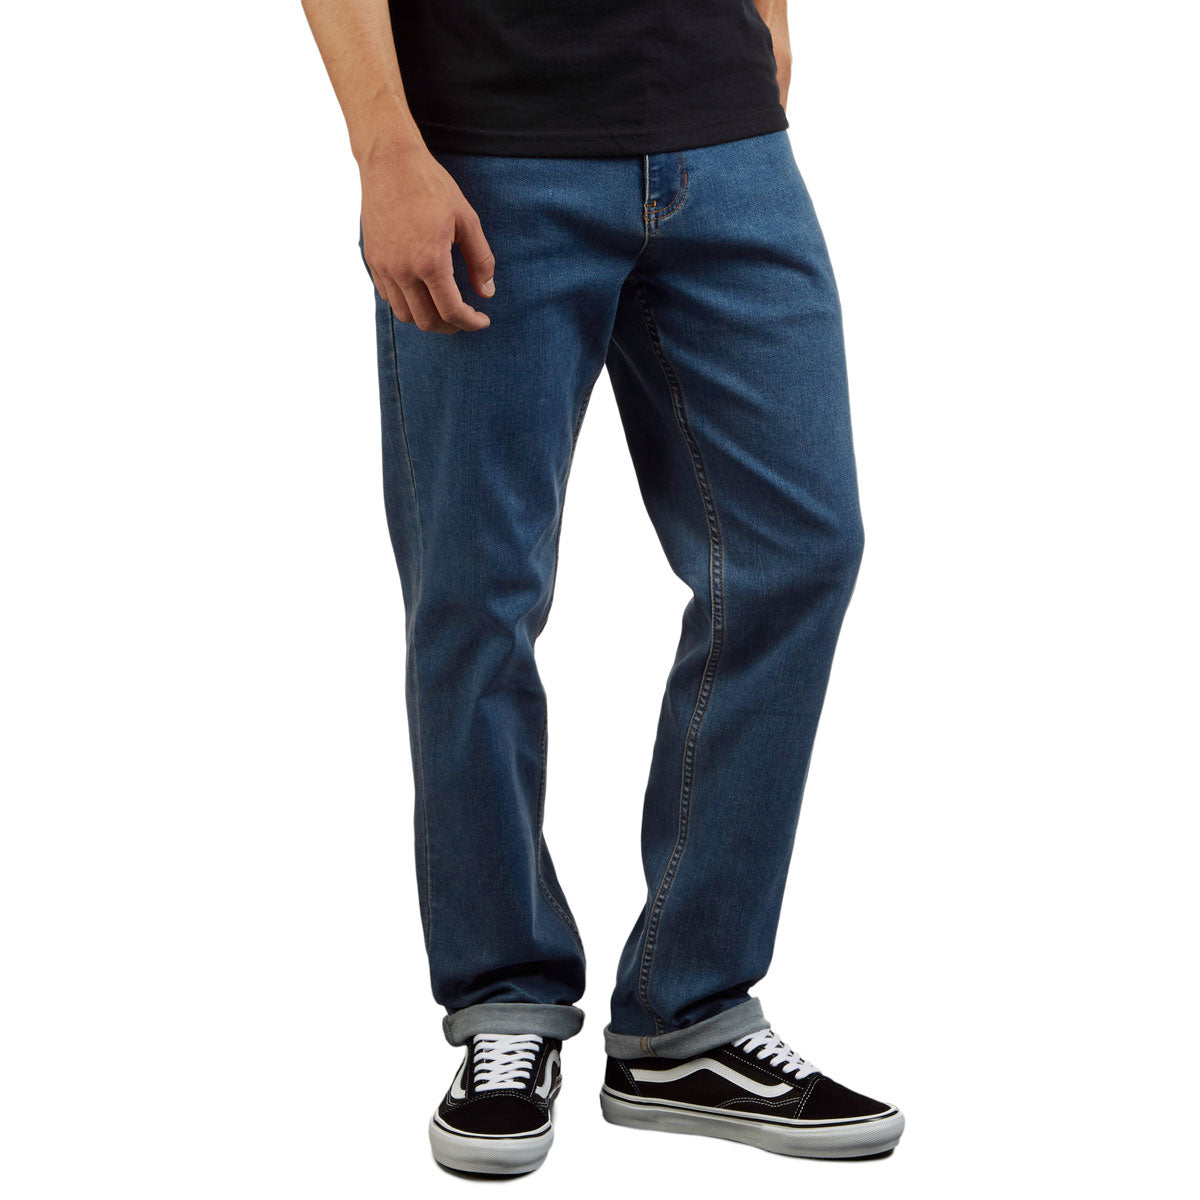 CCS Standard Plus Relaxed Denim Jeans - New Rinse image 4